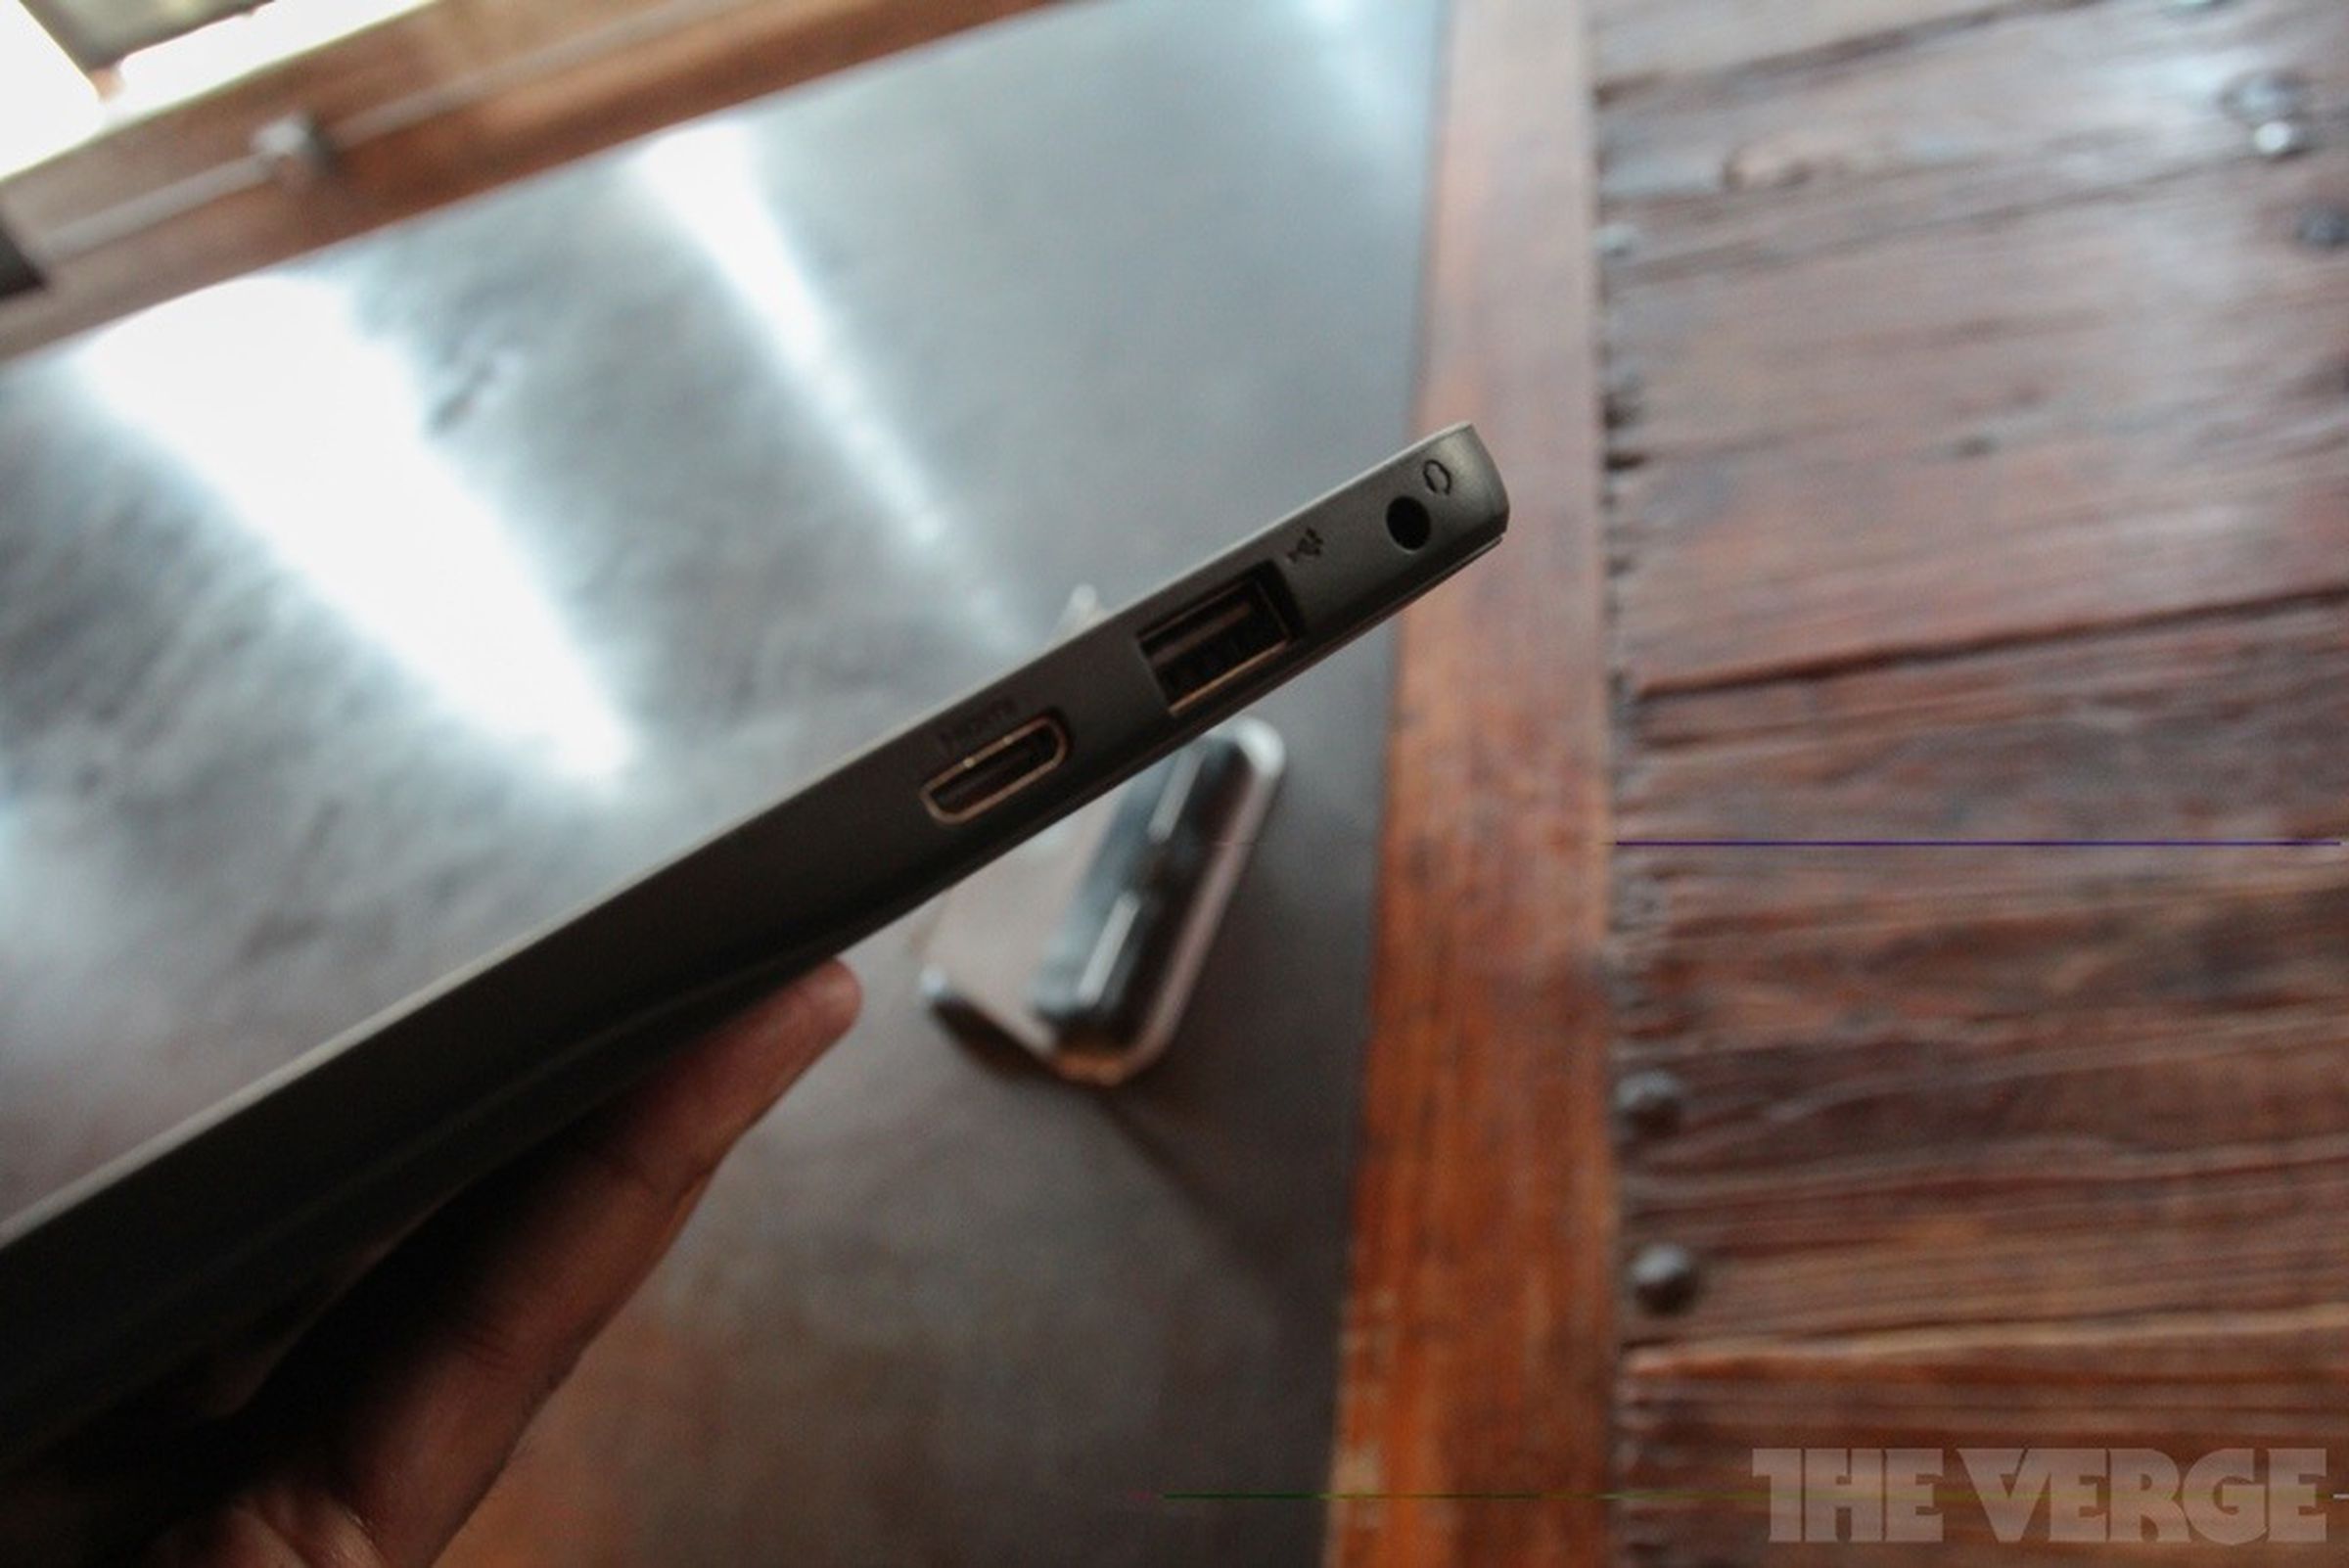 Dell Latitude 10 tablet hands-on photos